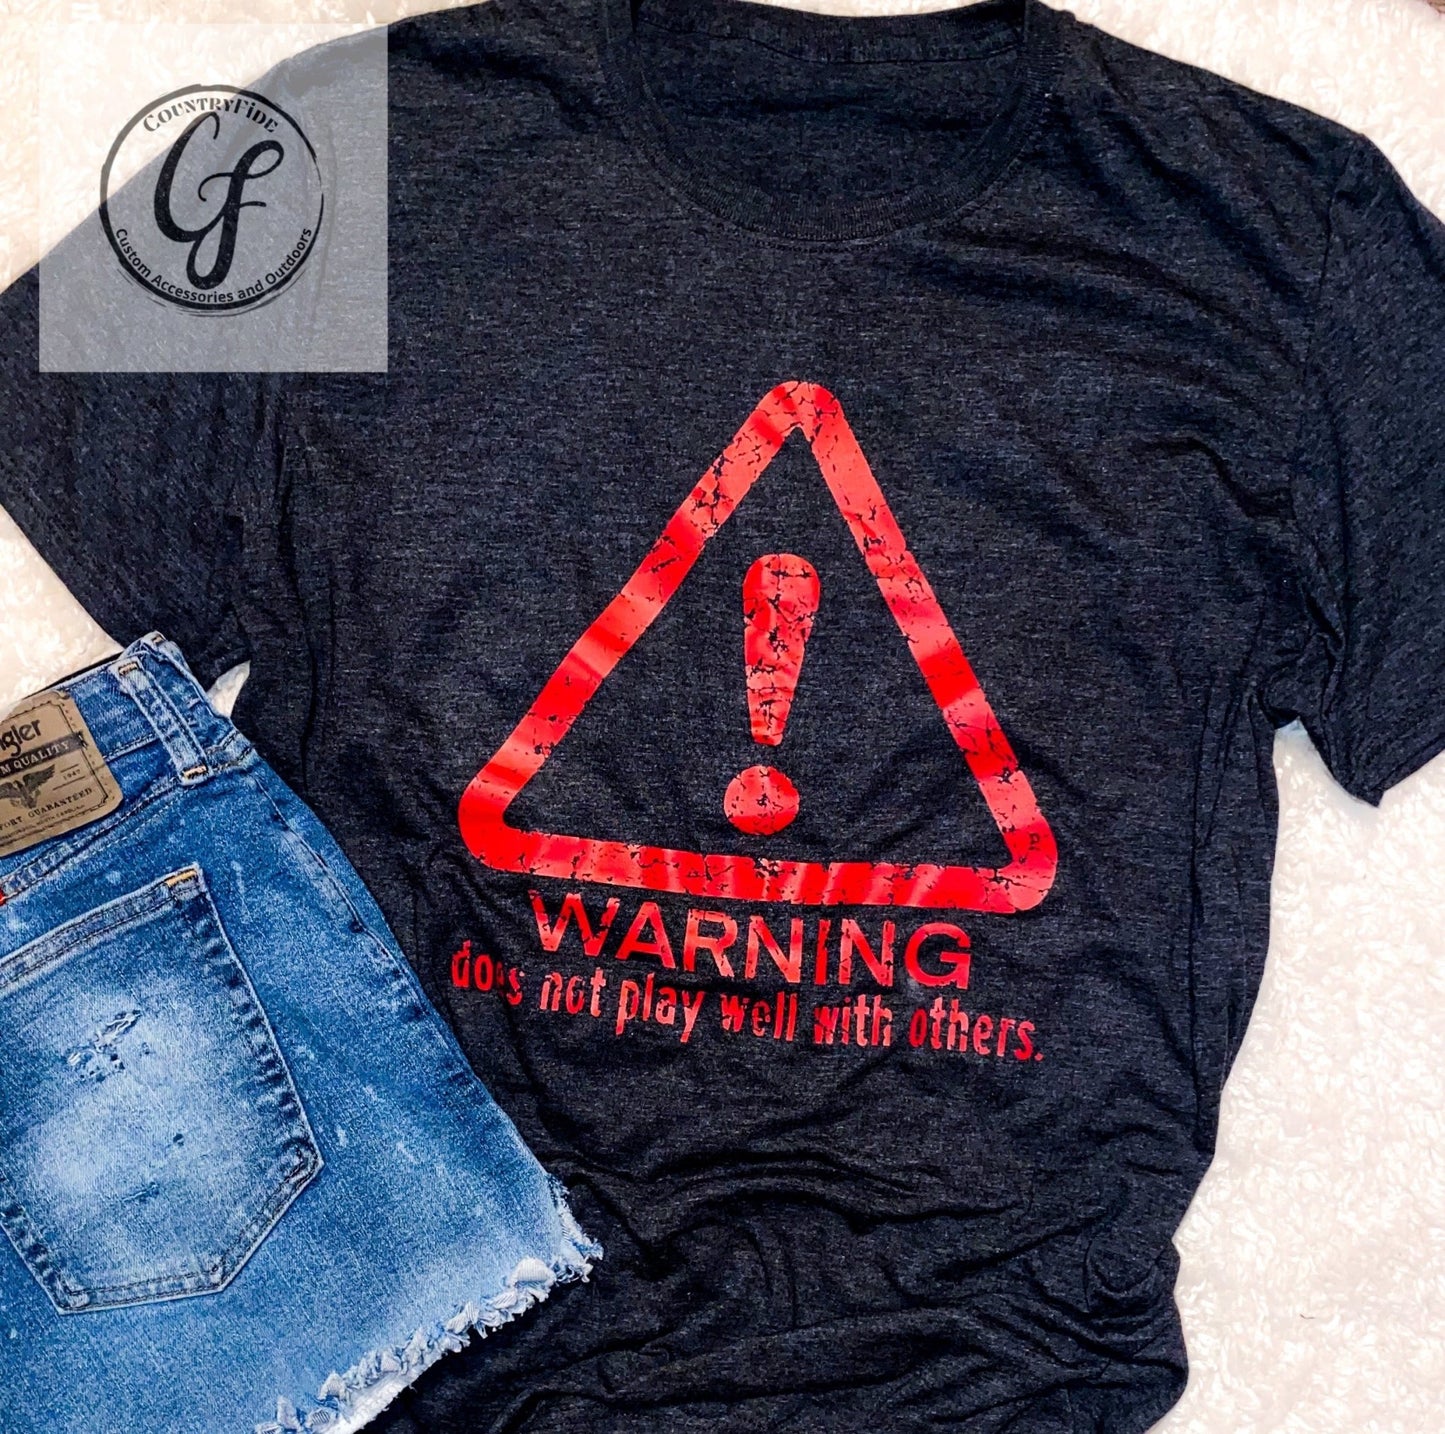 ⚠️ WARNING ⚠️ - CountryFide Custom Accessories and Outdoors